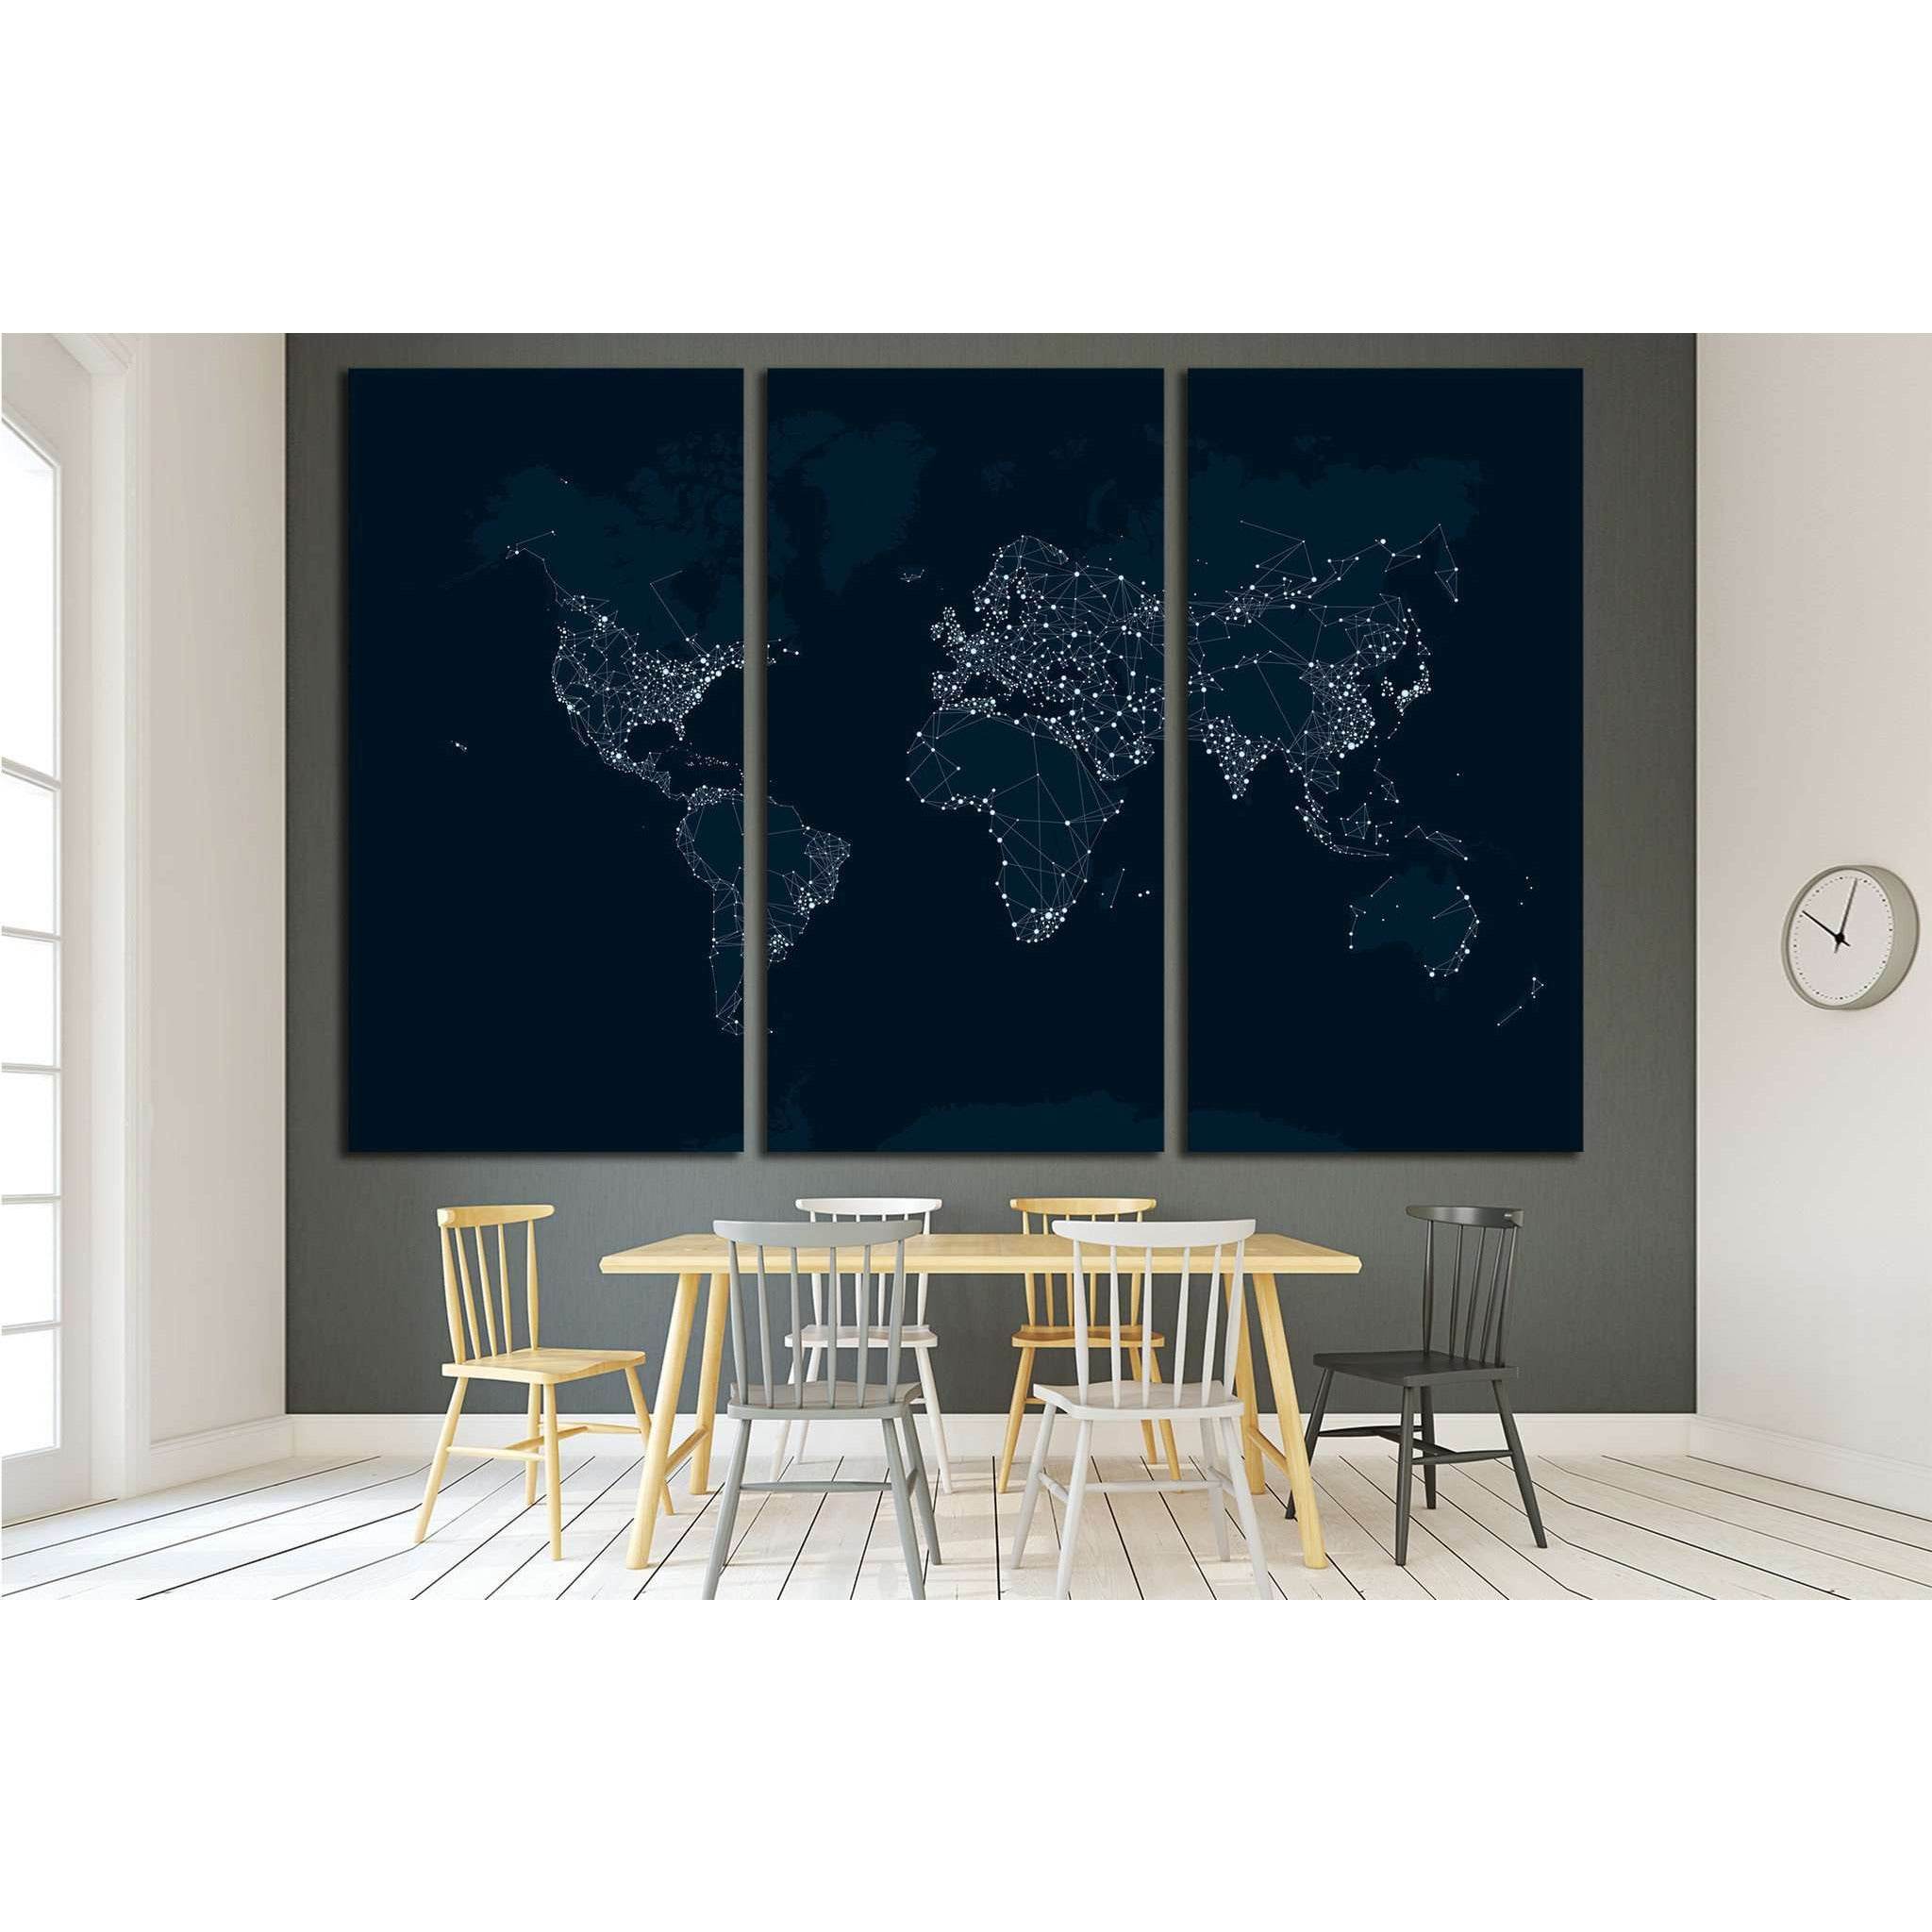 Communications network map of the world №1931 Ready to Hang Canvas Print